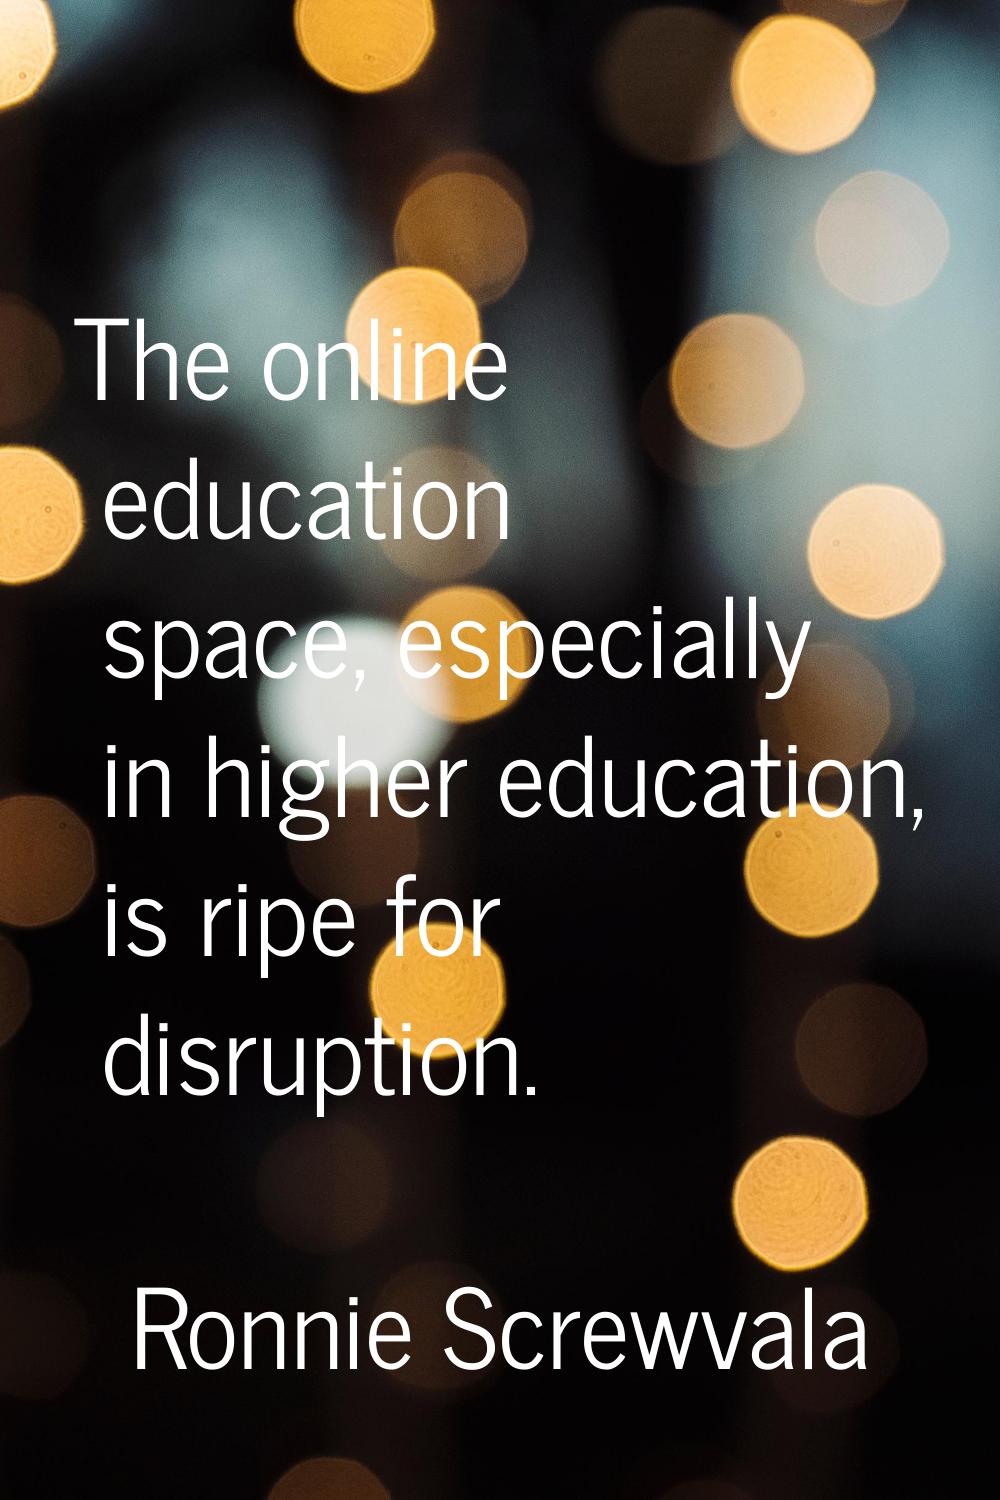 The online education space, especially in higher education, is ripe for disruption.